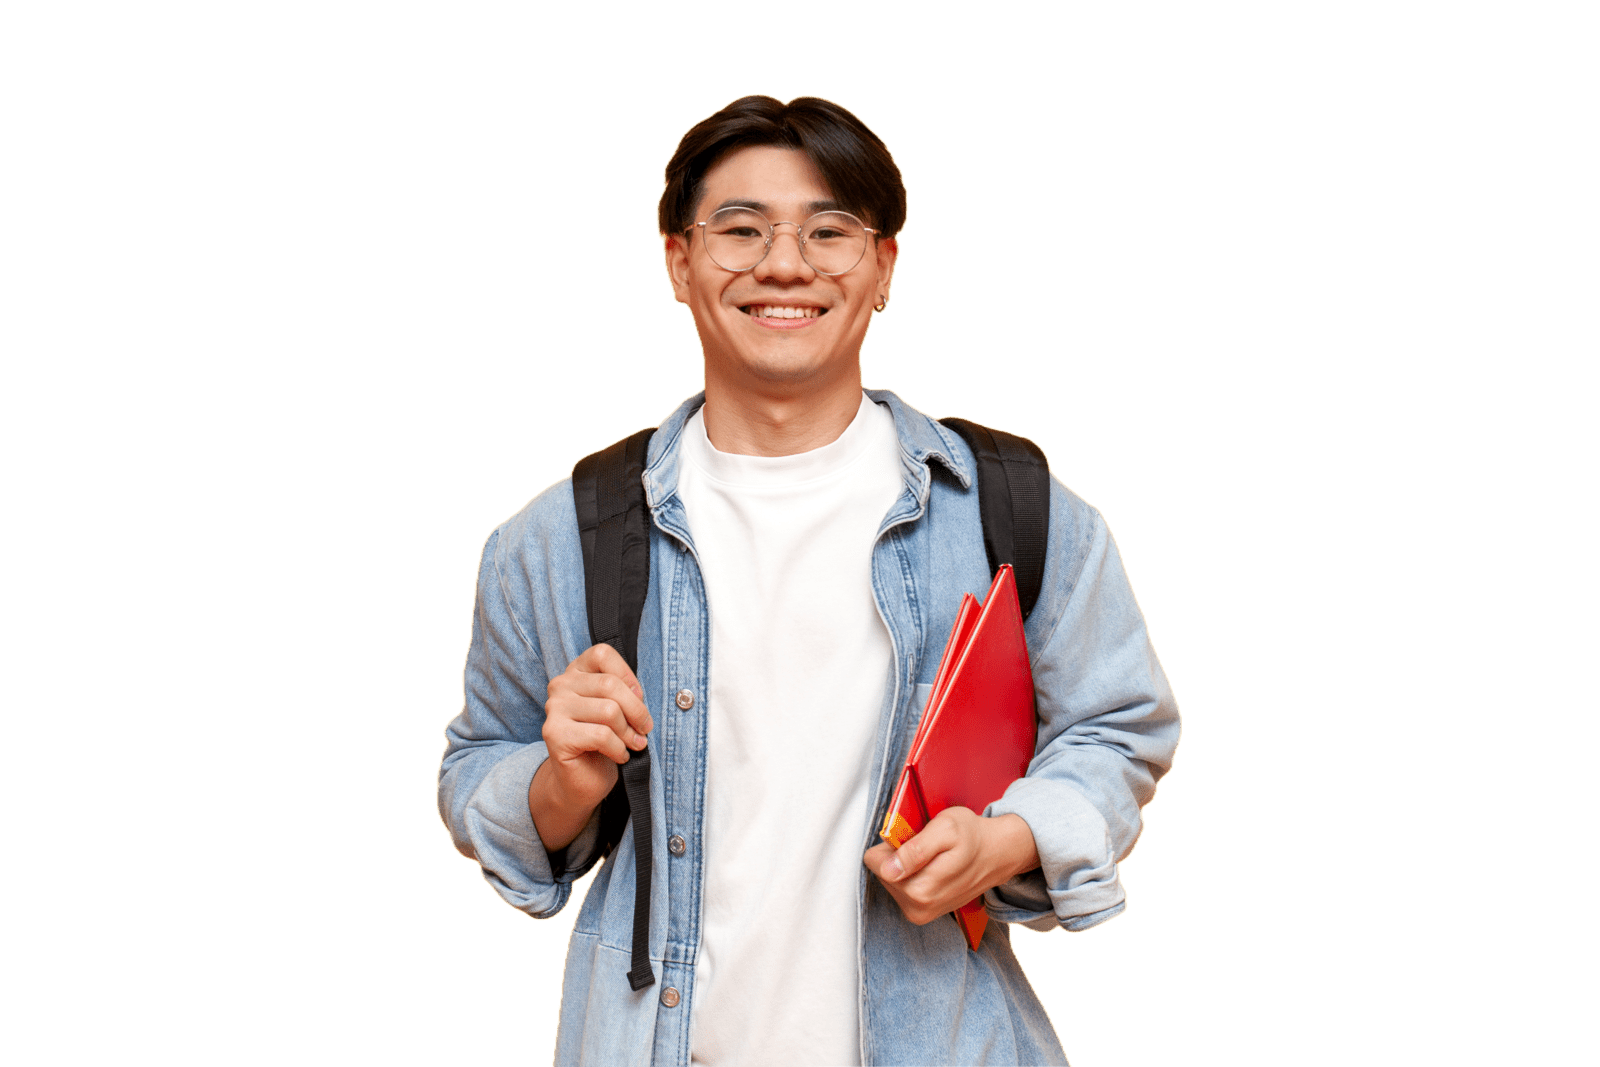 university student smiling with books in one hand while holding backpack strap with the other